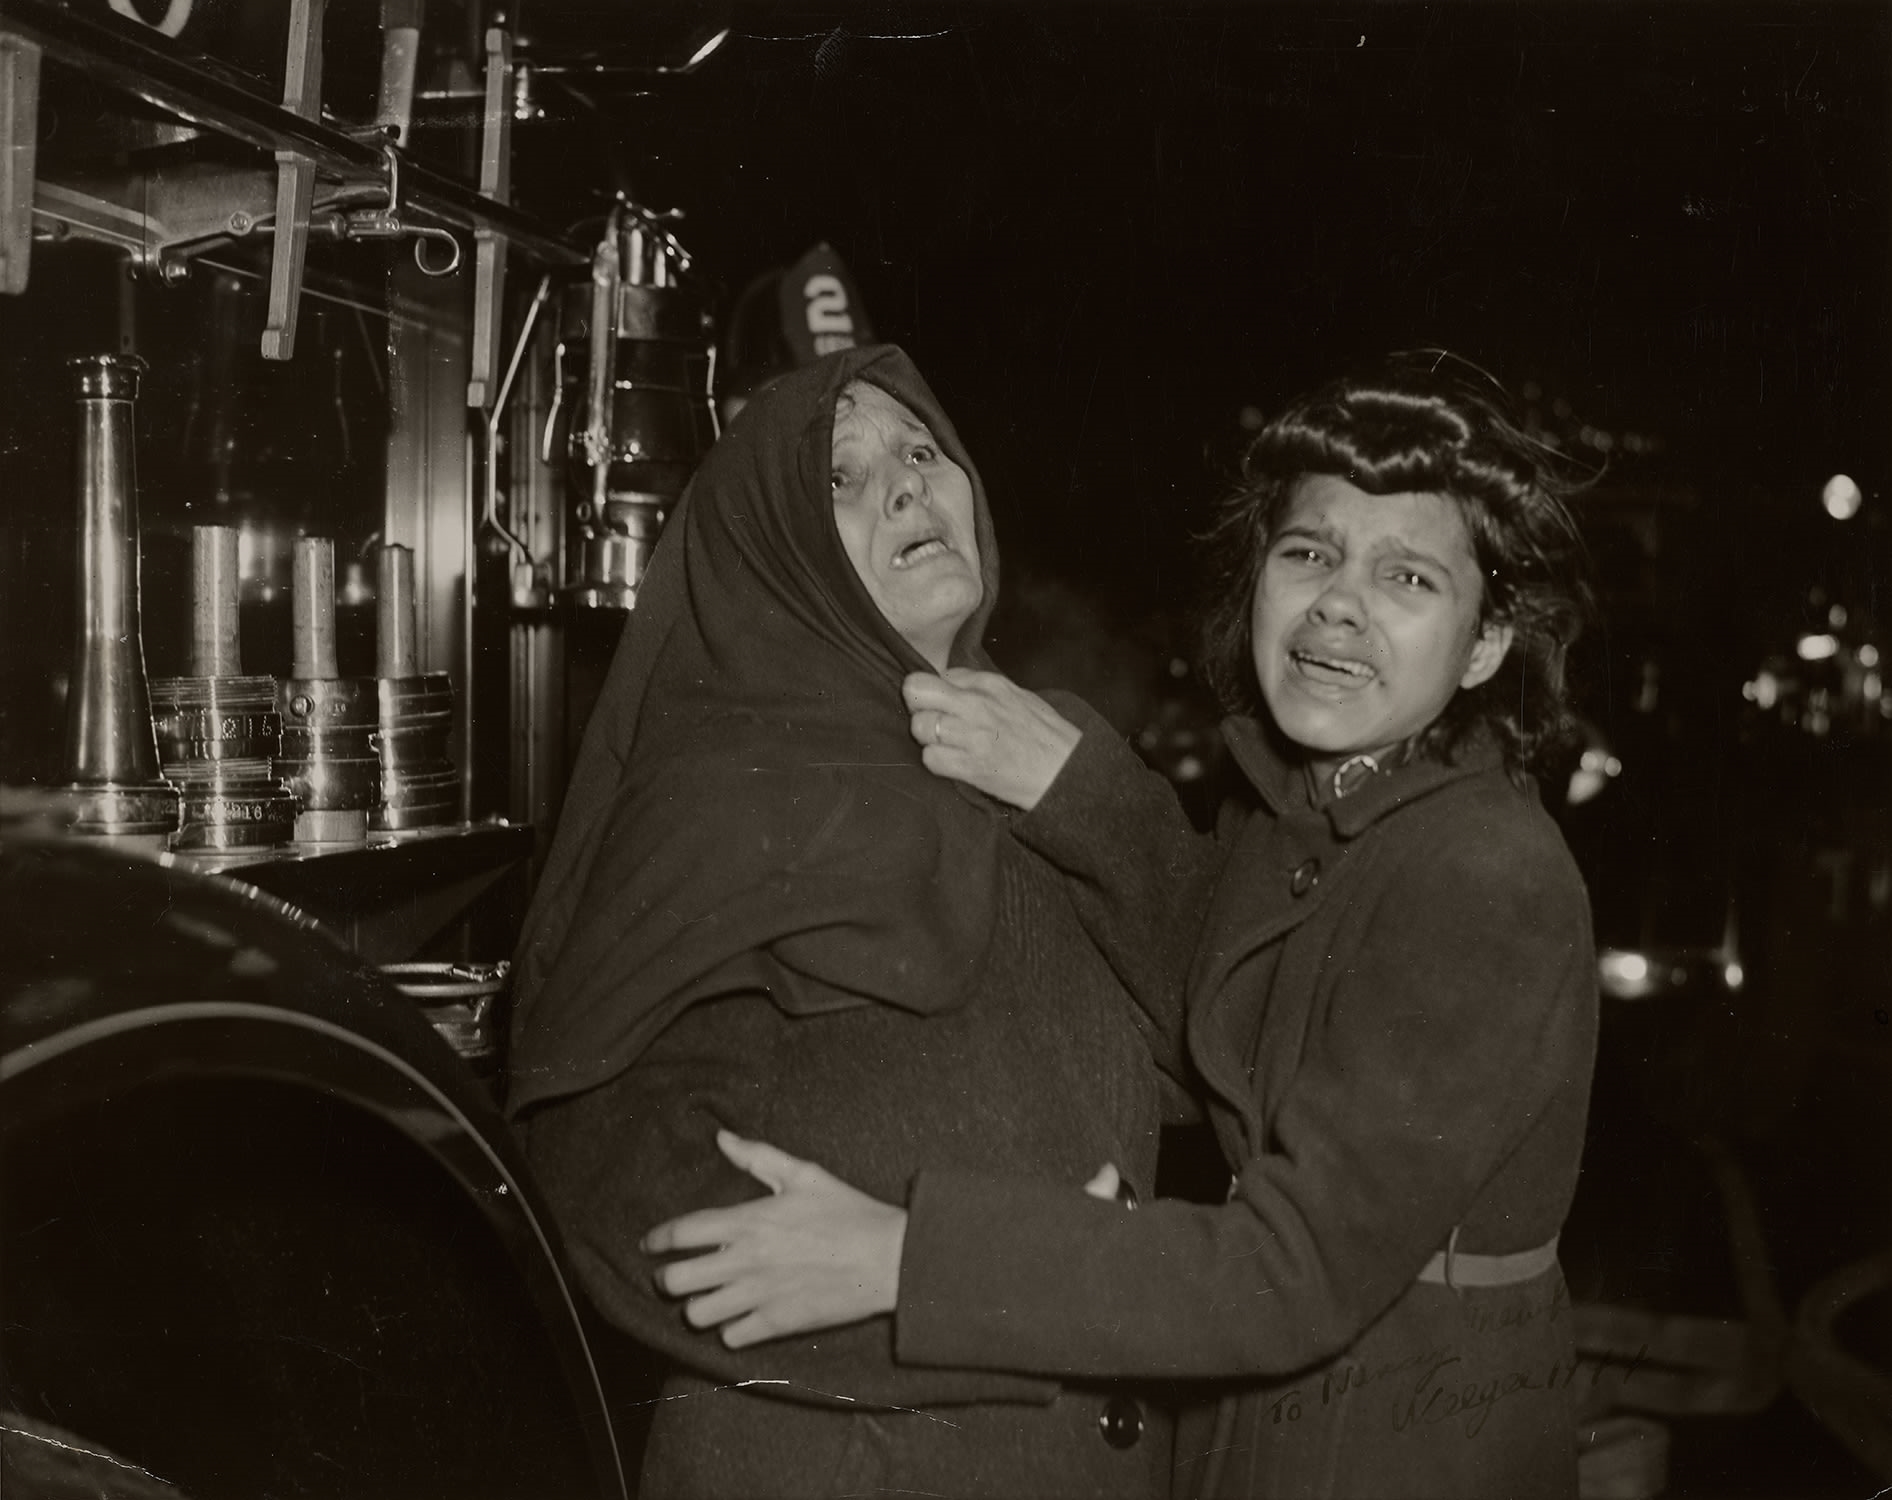 I Cried When I took this Picture (Tenement Fire, Harlem - Weegee